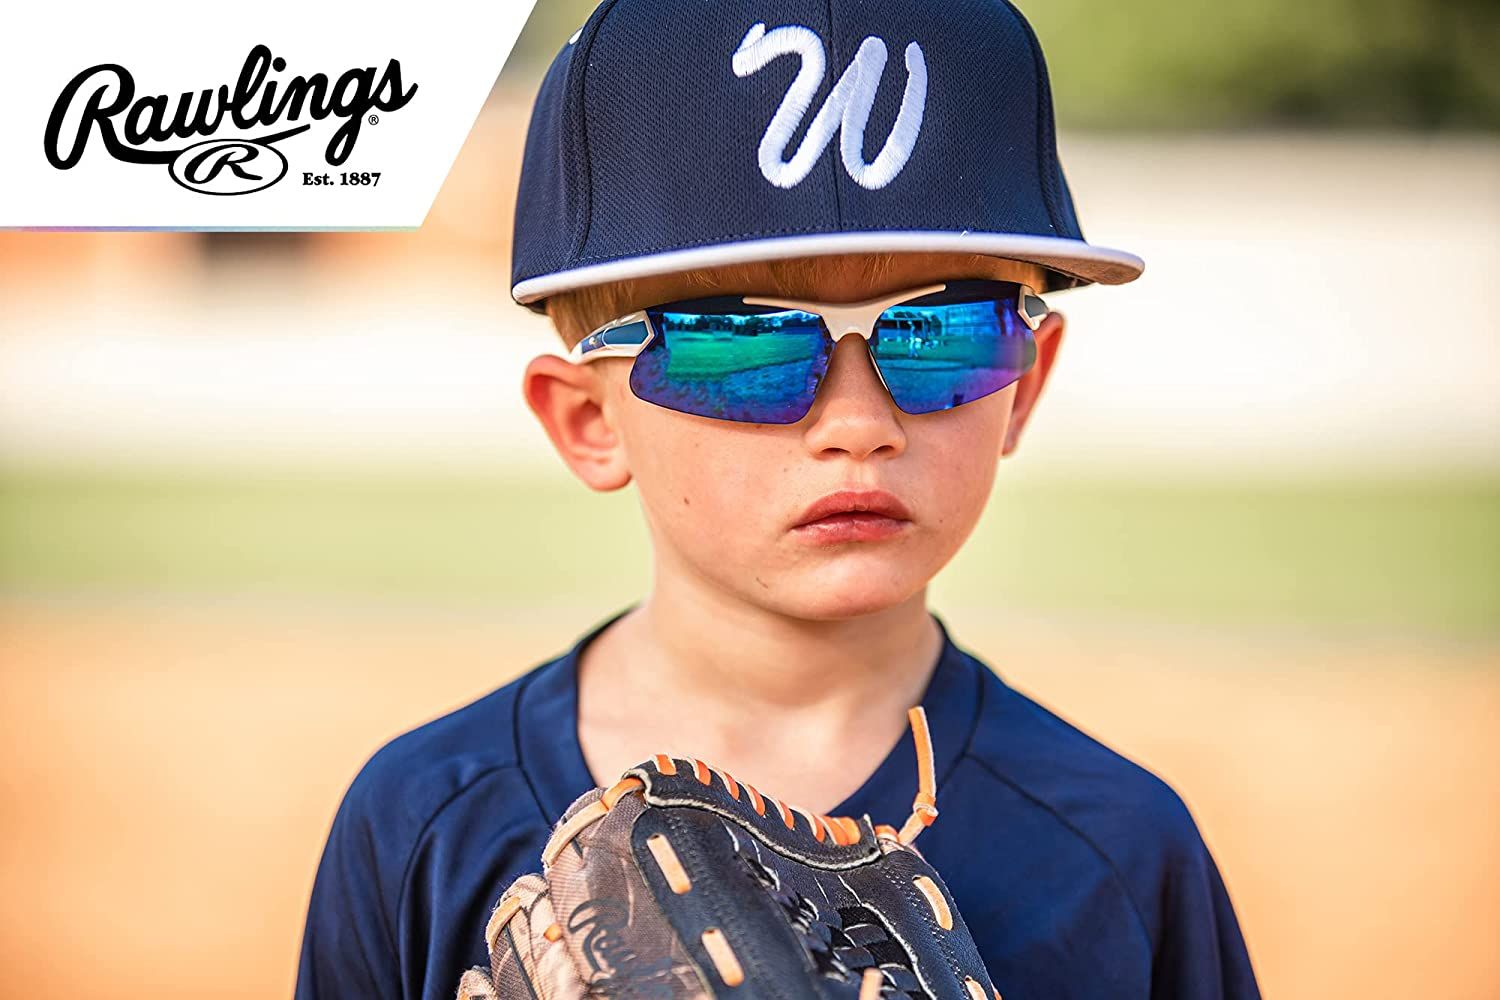 Rawlings Youth Boys Athletic Sunglasses 107White/Blue Mirrored Lens 10228972.QTS - image 5 of 9